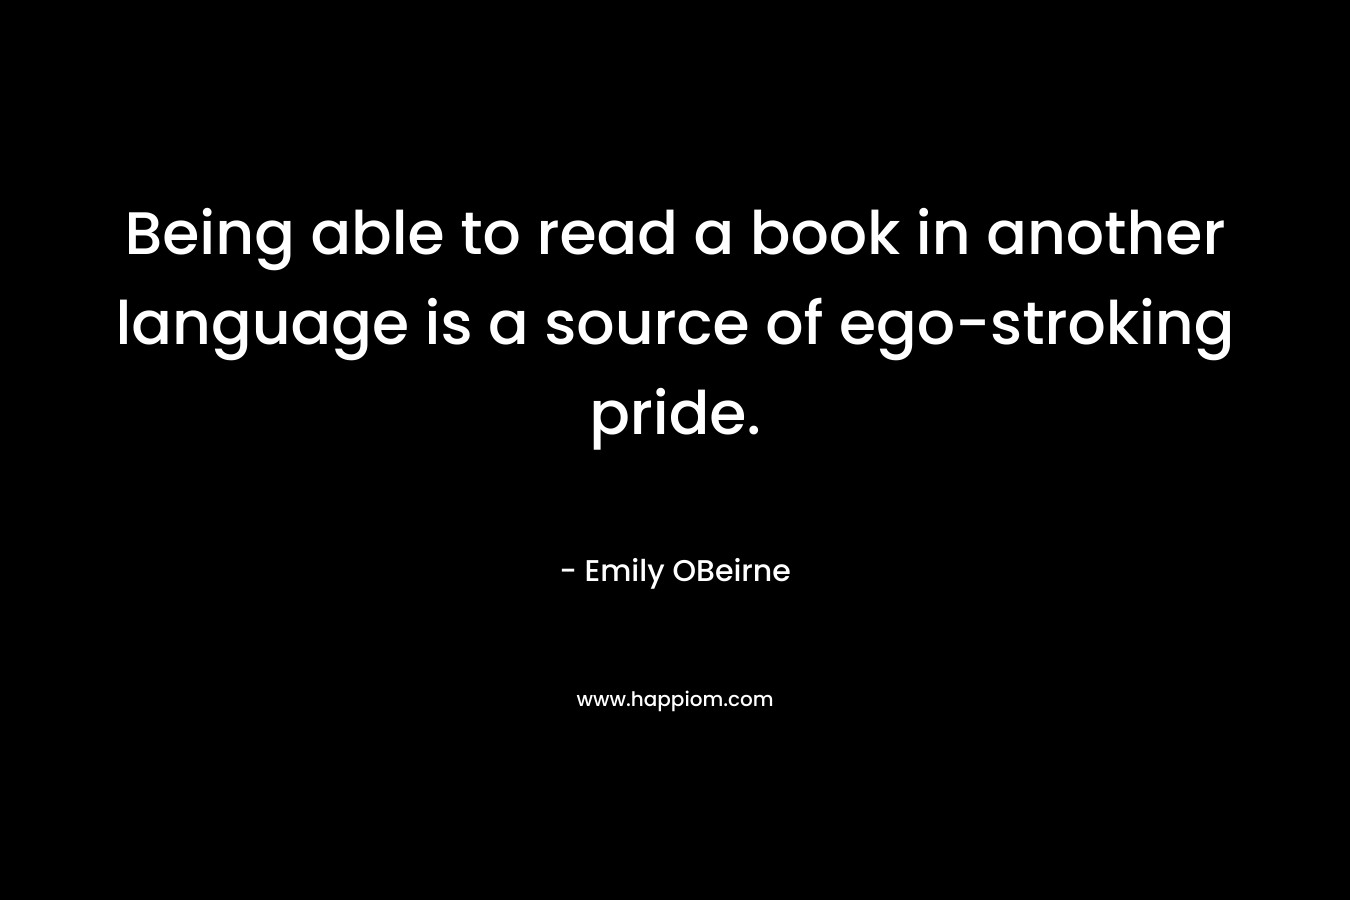 Being able to read a book in another language is a source of ego-stroking pride.